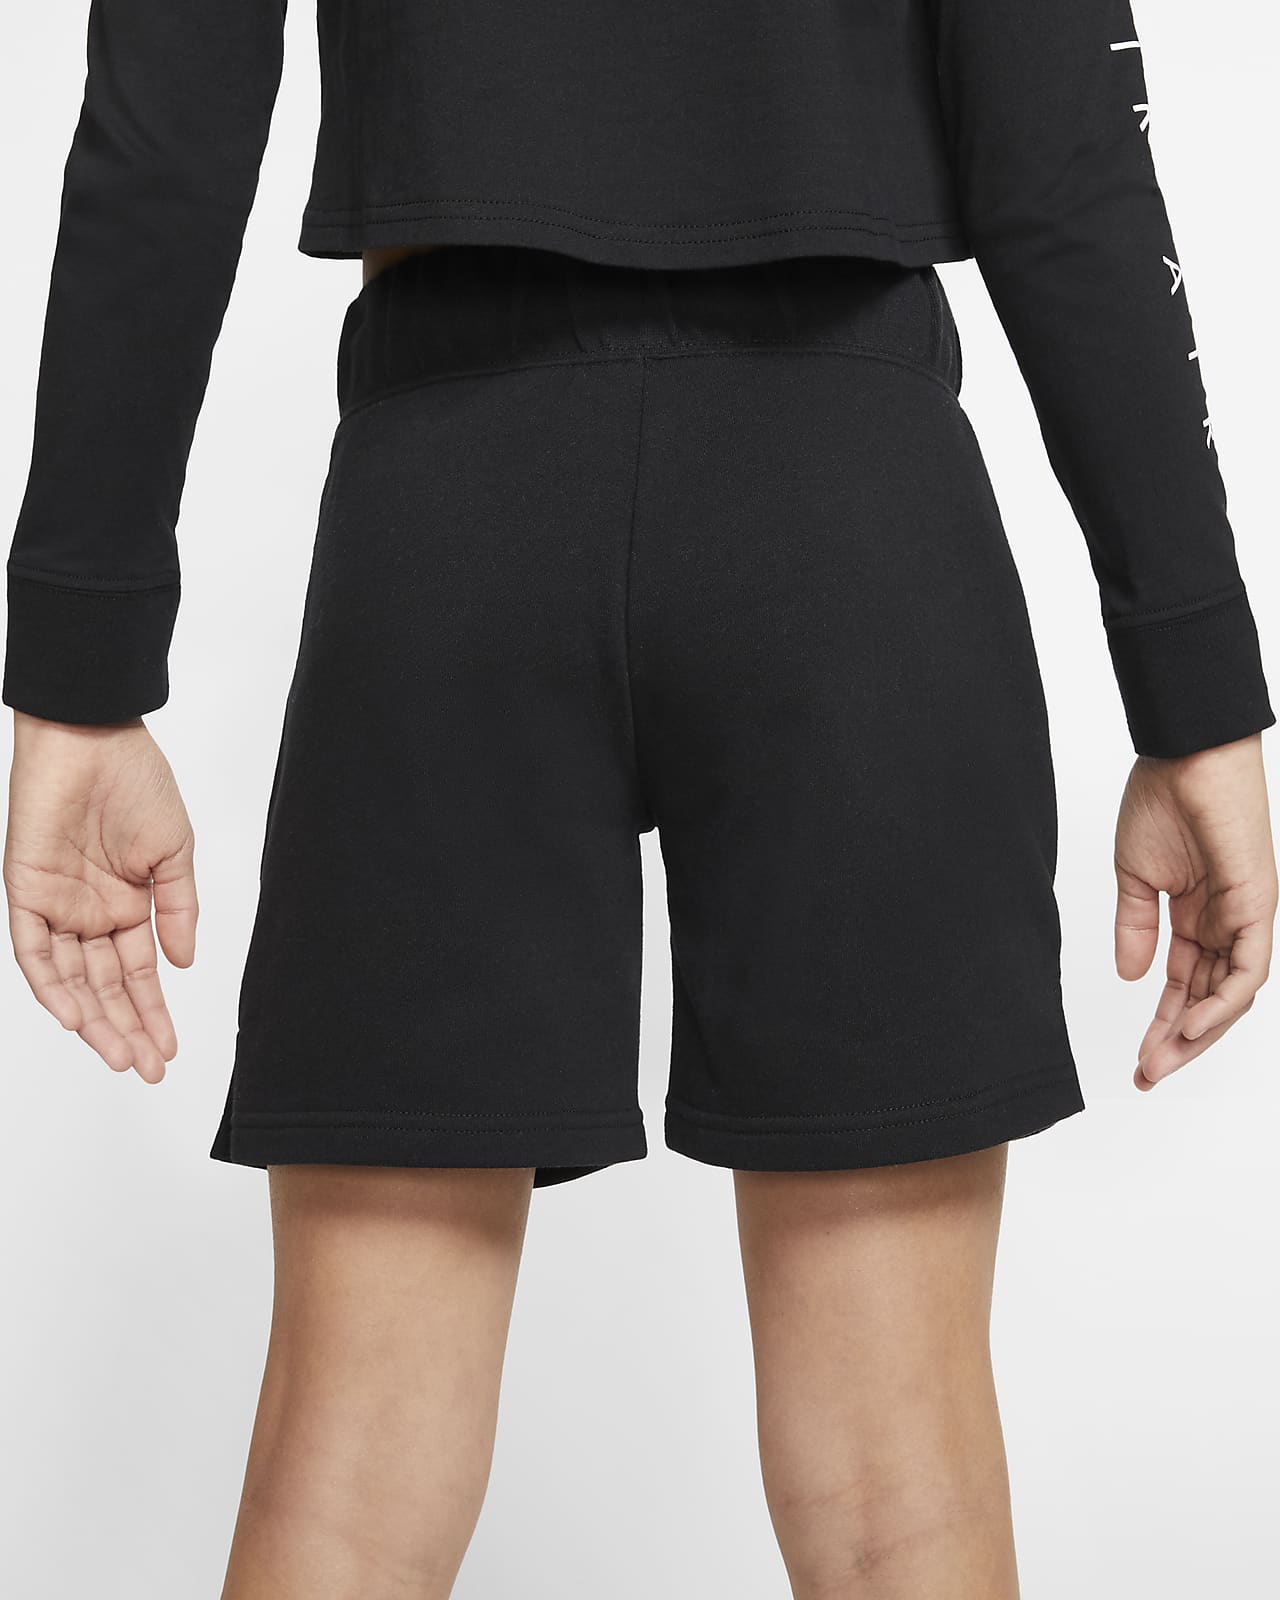 nike girl shorts with pockets